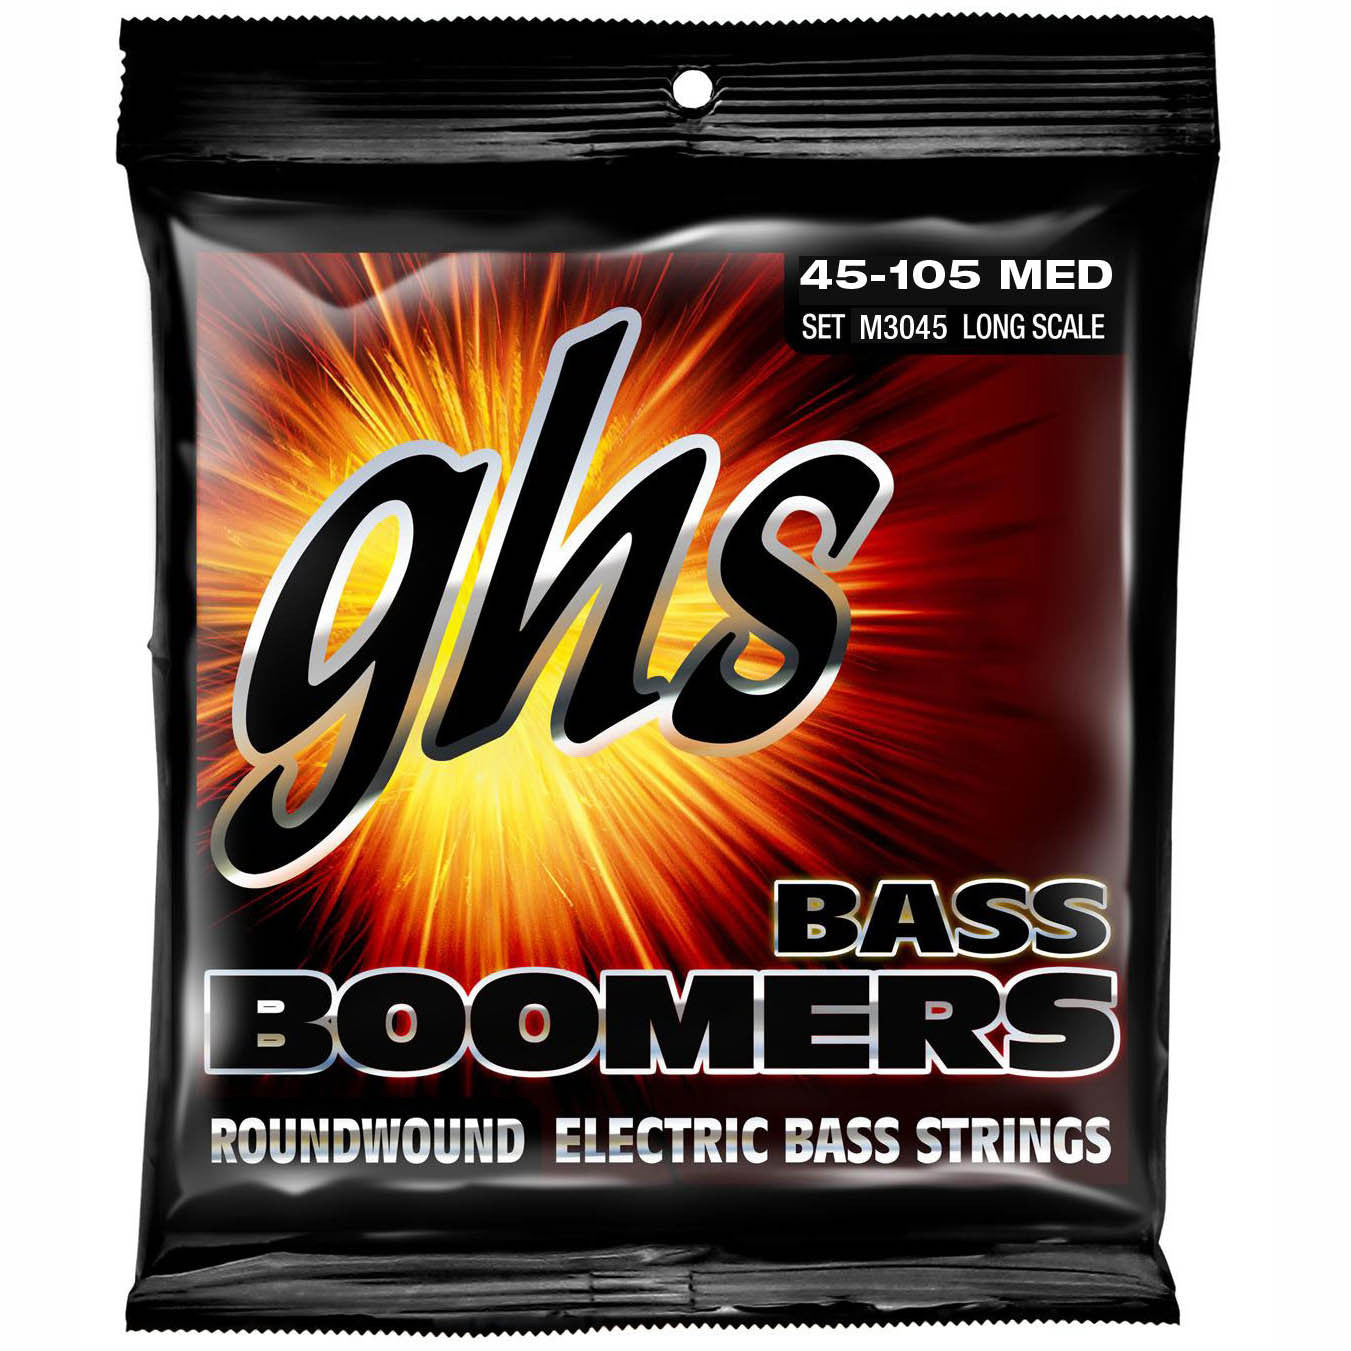 GHS Bass Boomers Bass Strings 45-105